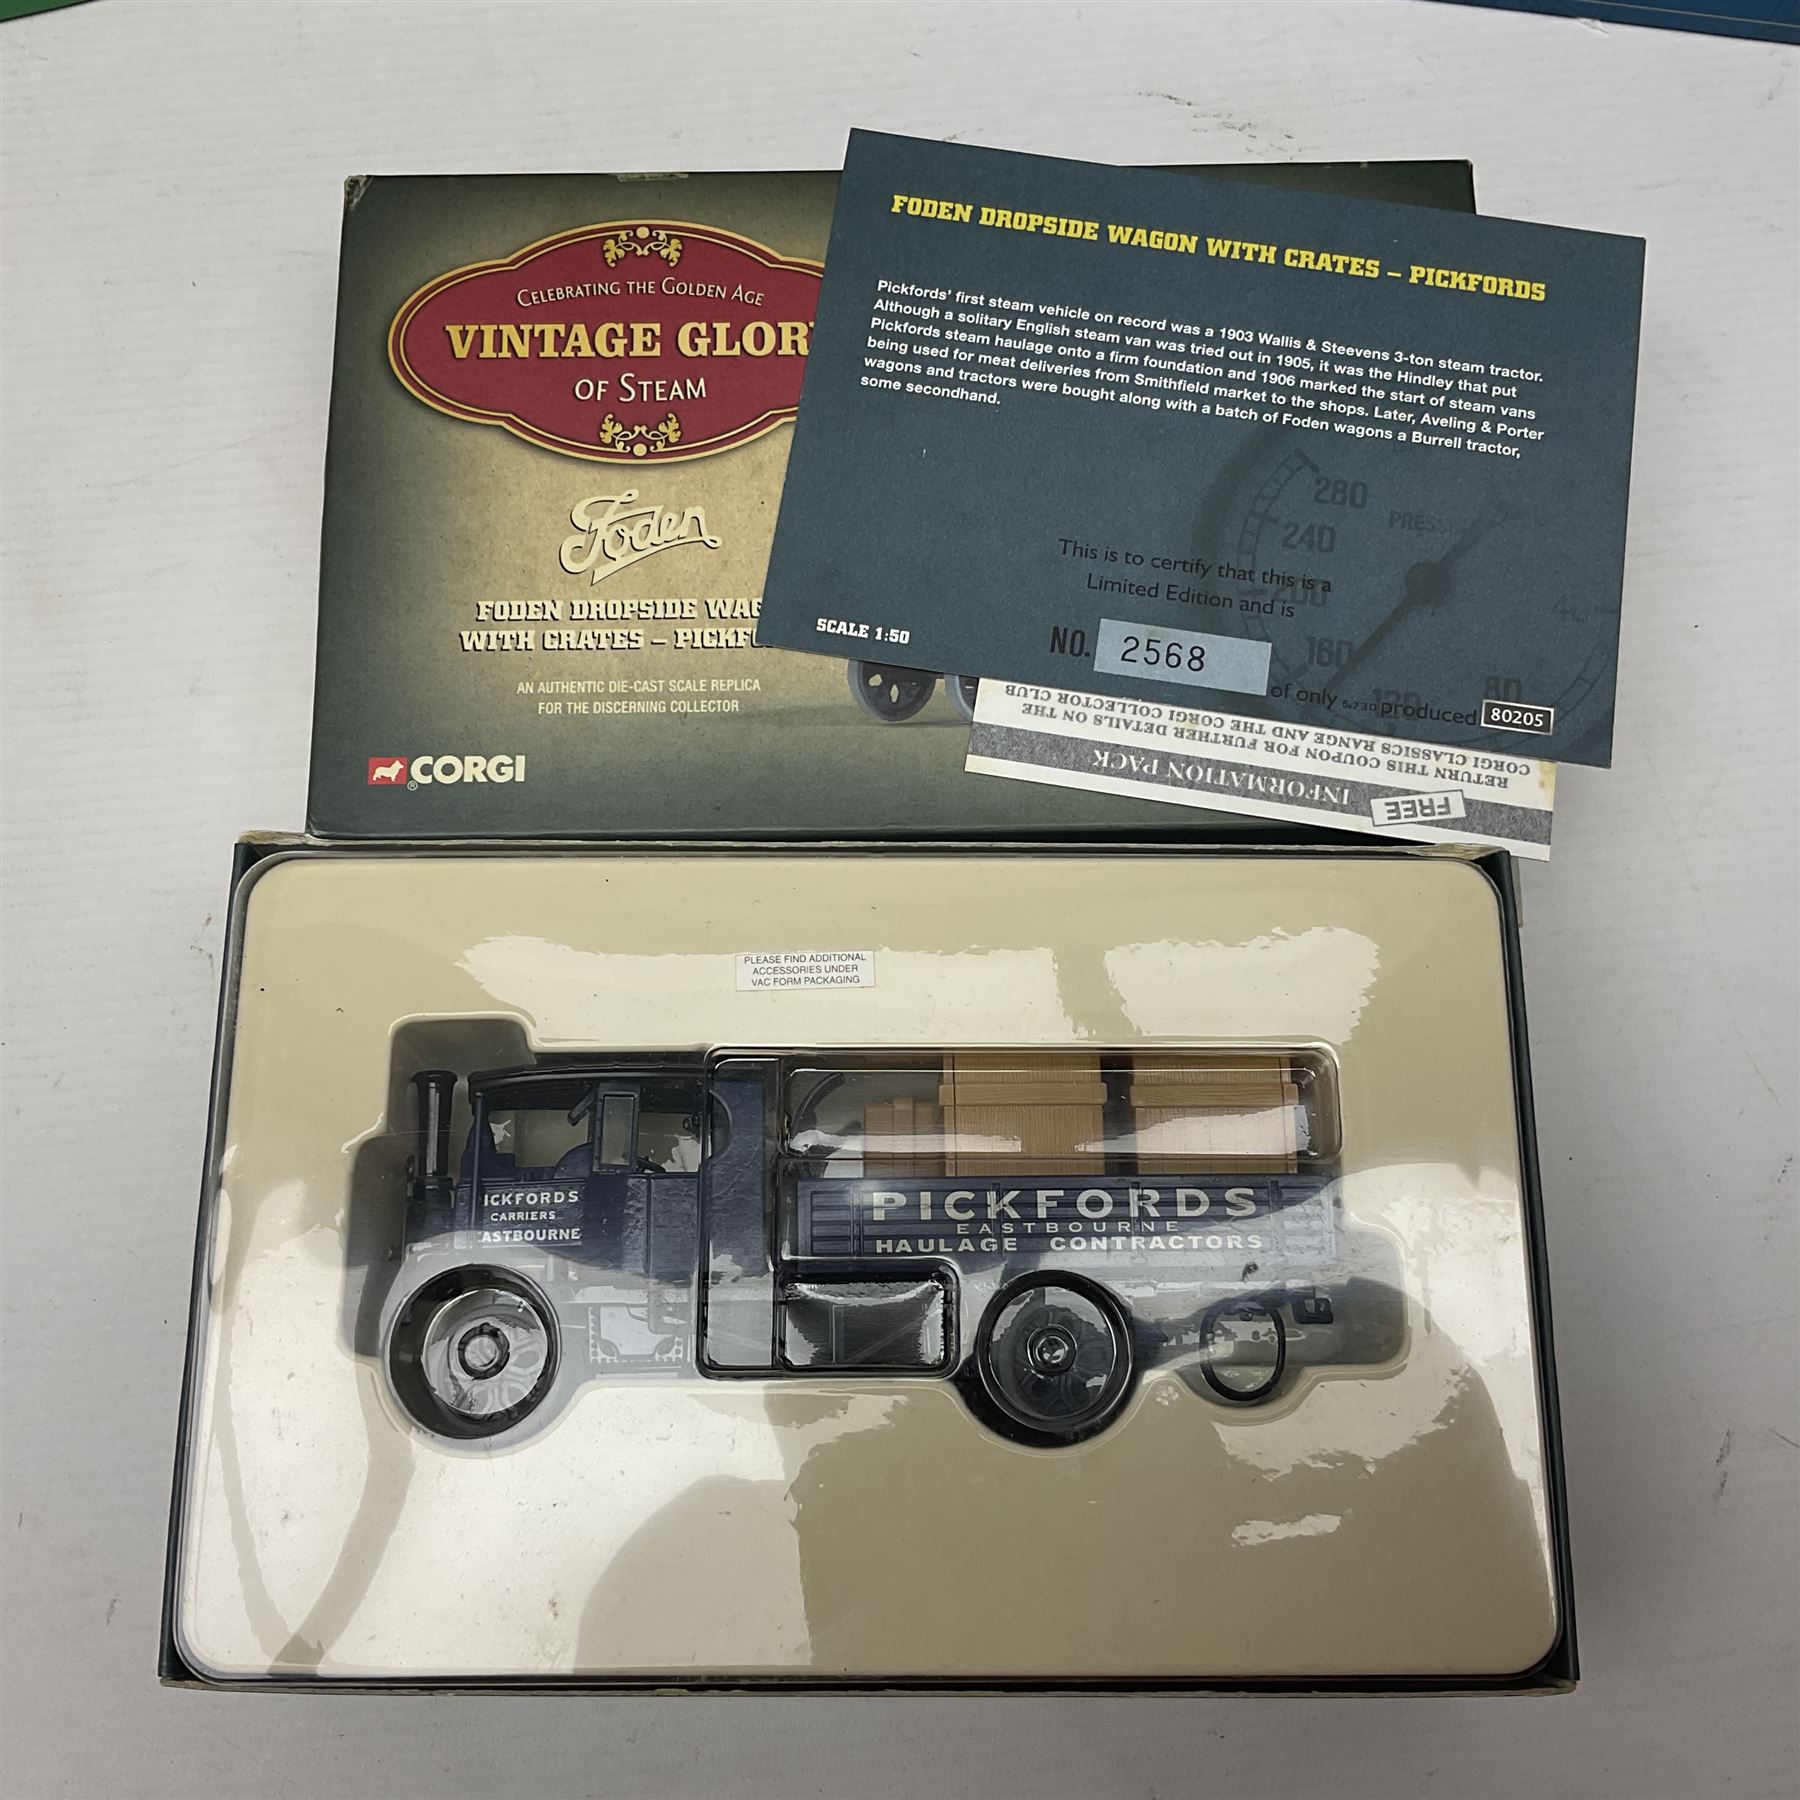 Eight Corgi die-cast models - four limited edition Vintage Glory of Steam Nos.80002 - Image 2 of 13